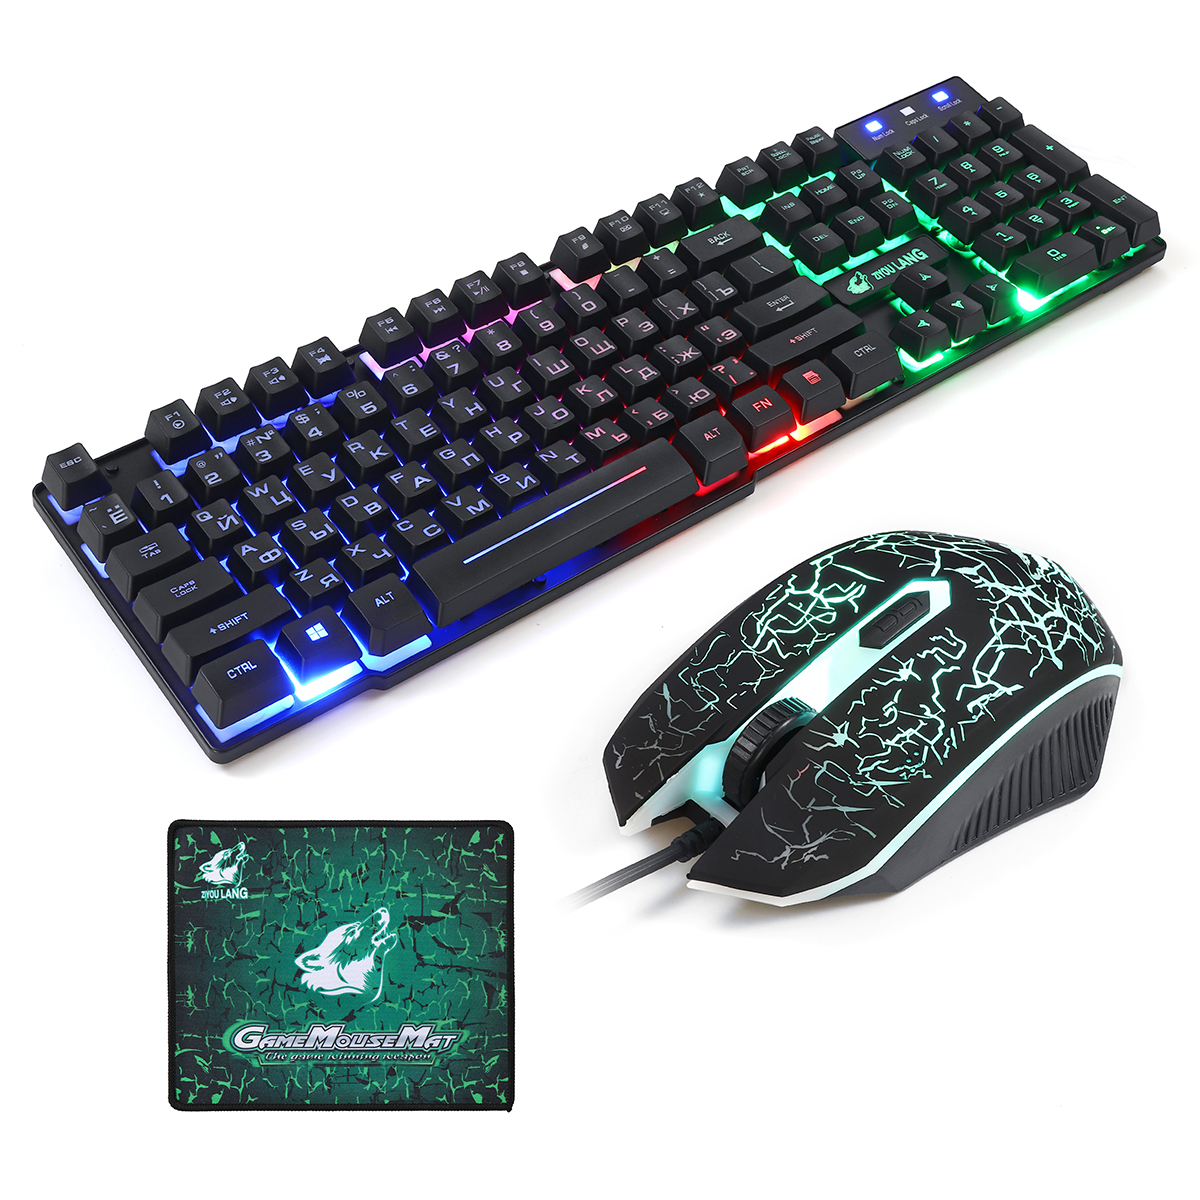 

T5 Colorful Backlight USB Wired Gaming Keyboard and 2000DPI LED Gaming Mouse Combo with Mouse Pad